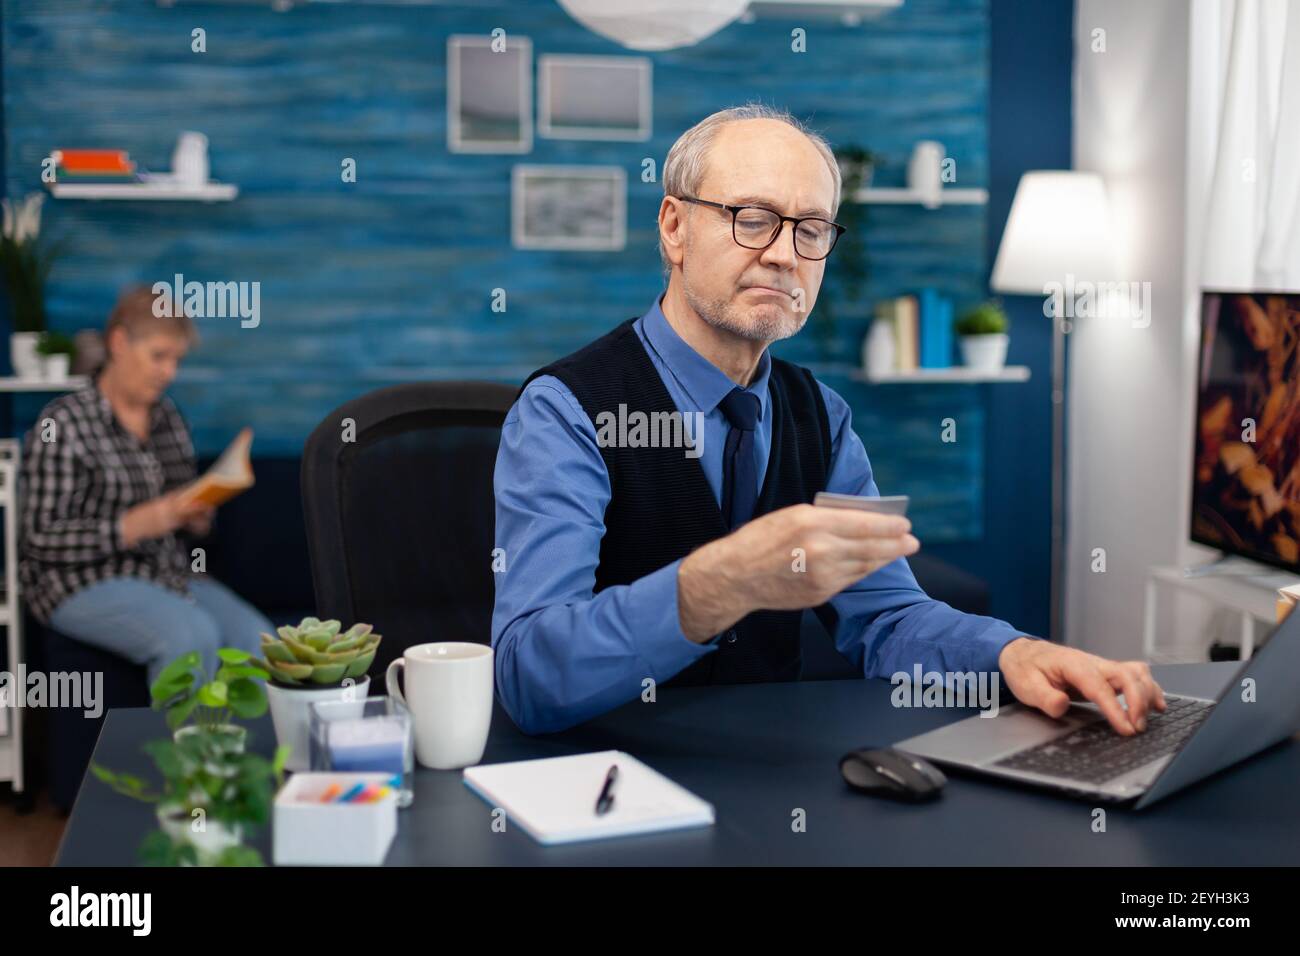 Senior man reading cvv conde on credit card wearing glasses. Elderly man checking online banking to make shppping payment looking at laptop while wife is reading a book sitting on sofa. Stock Photo